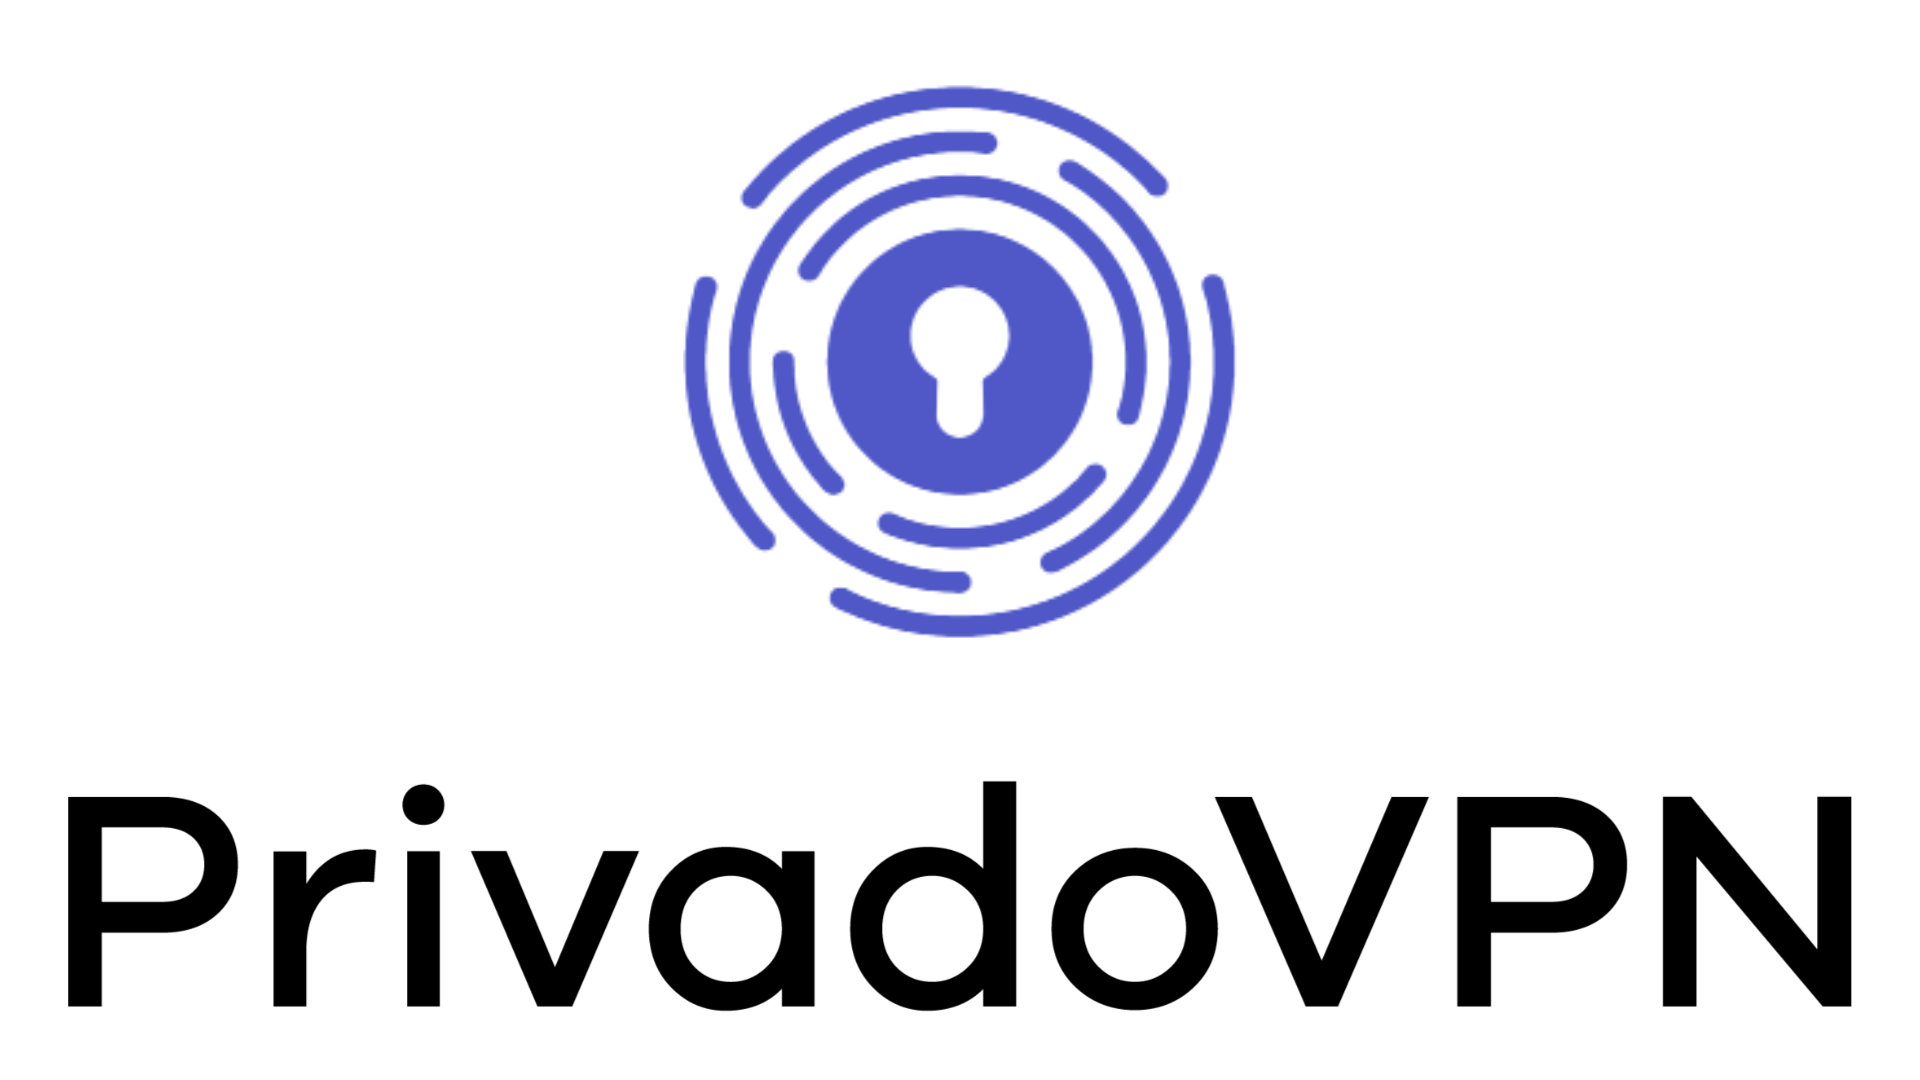 Best VPN for Chrome: PrivadoVPN.  The image shows the company logo.